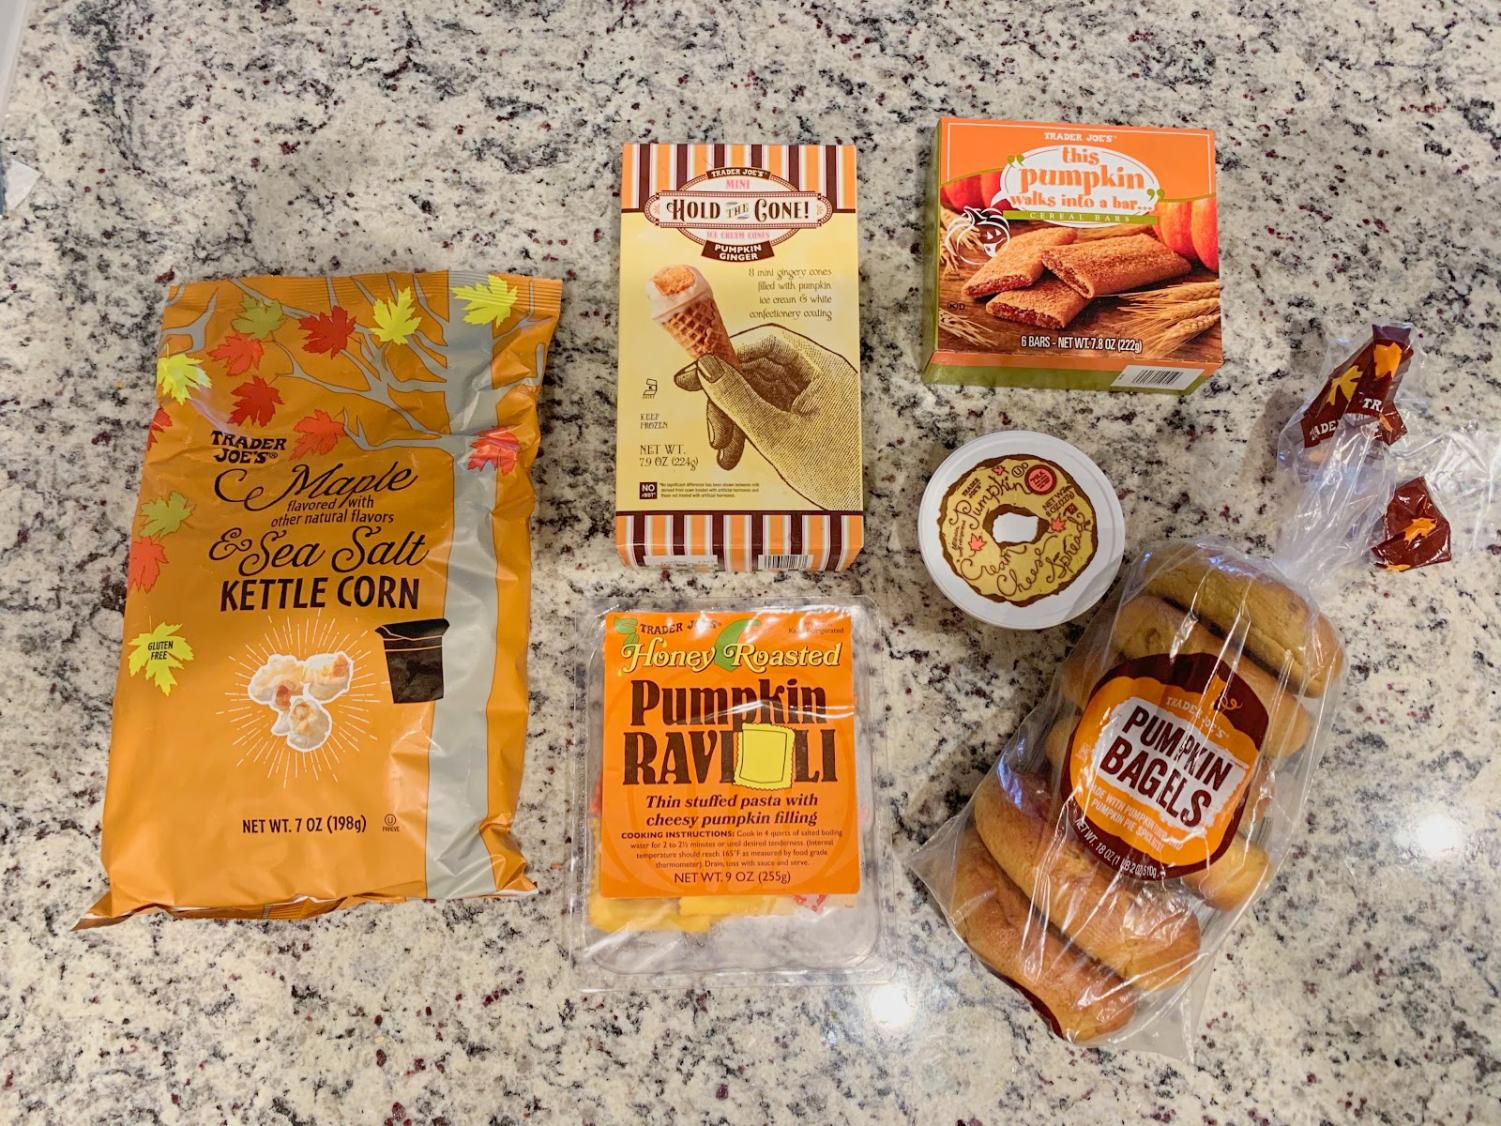 Trader Joes is offering a wide variety of fall-themed items for their customers to purchase (Natalie Vitols)